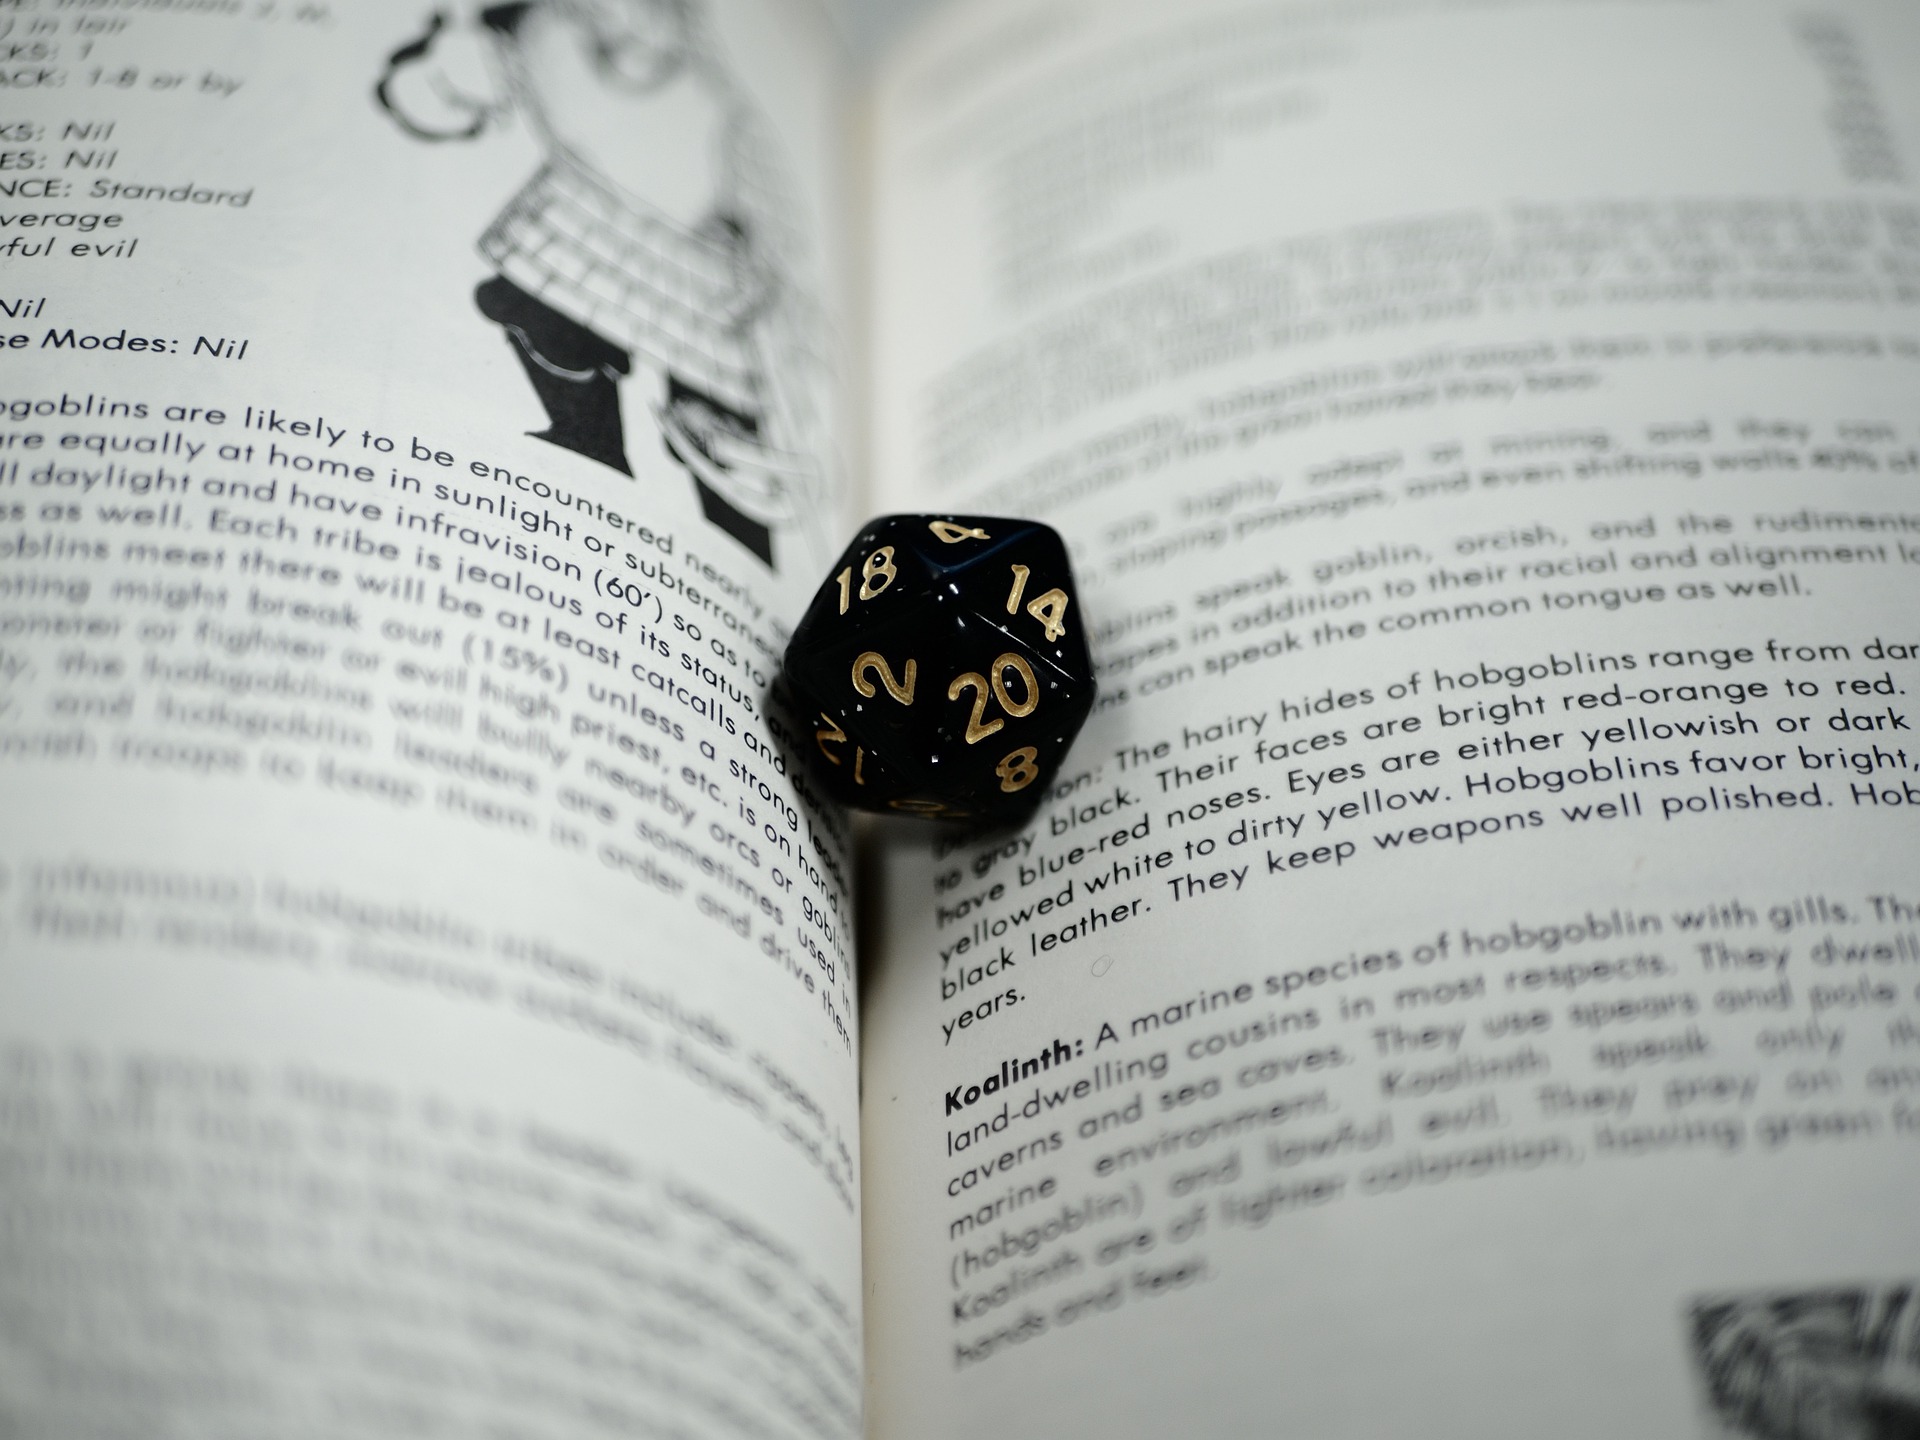 Digital Dice: How Dungeons & Dragons exploded online